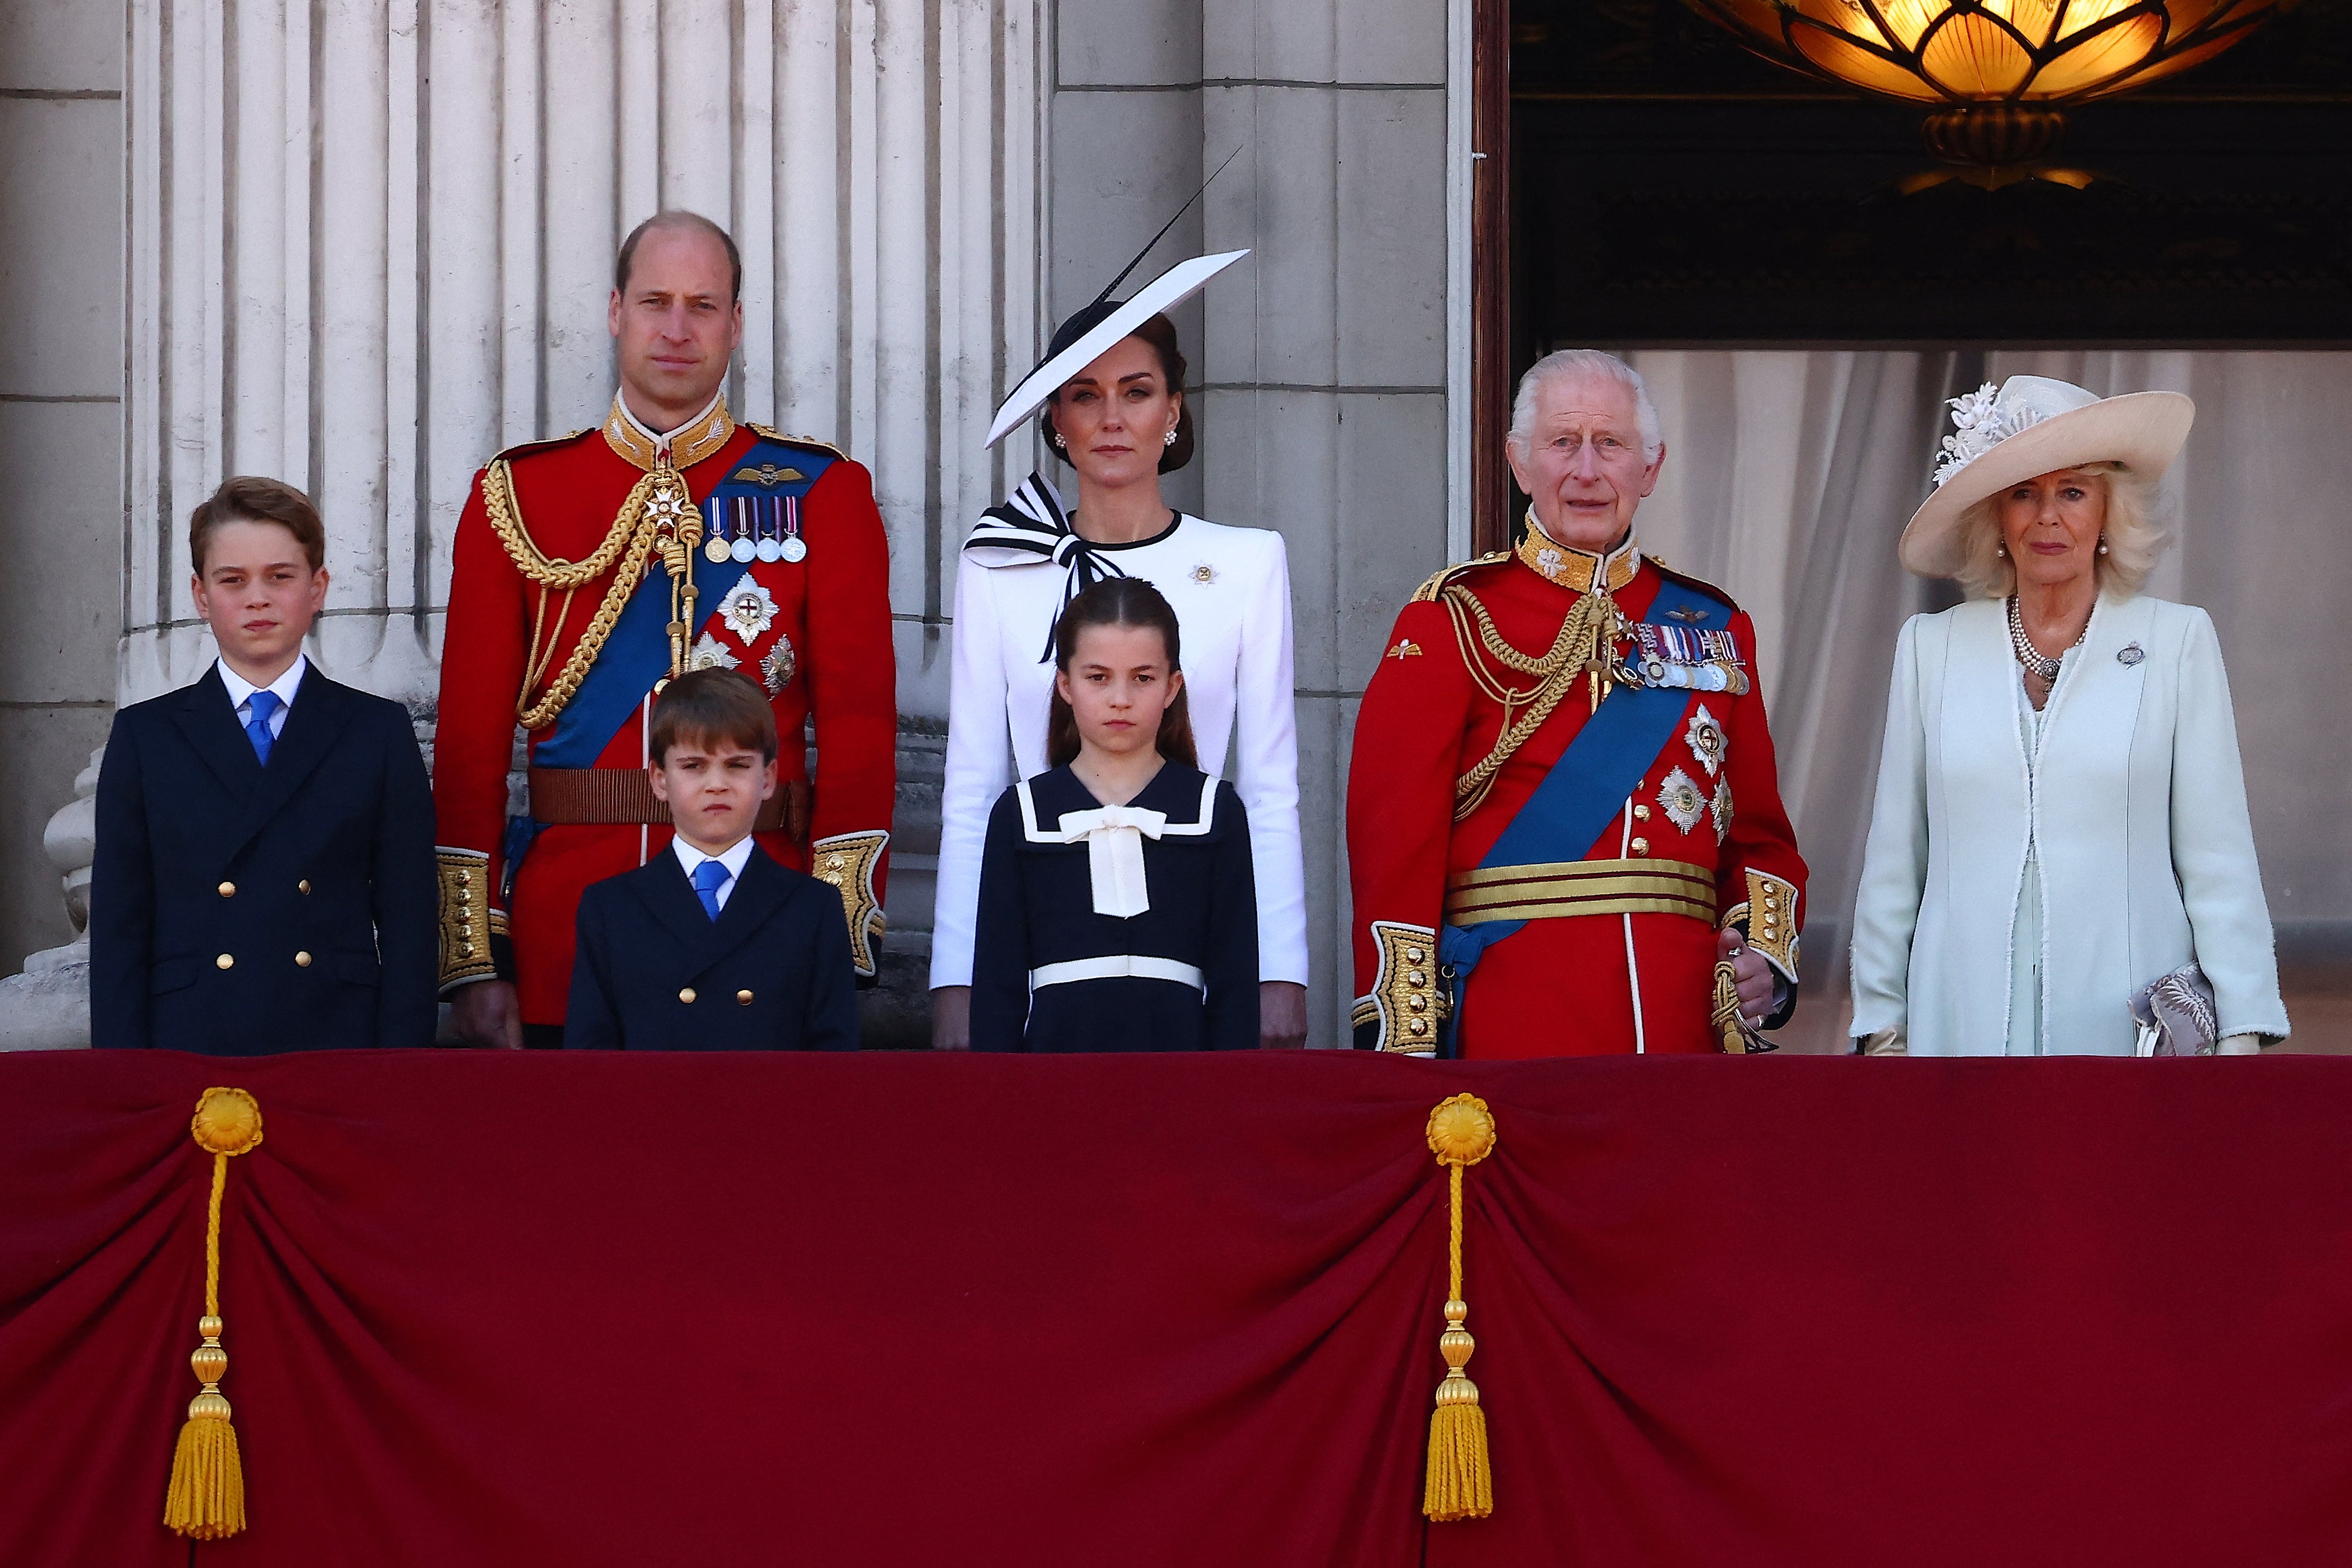 King Charles is joined by the Royal Family on the balcony of Buckingham Palace